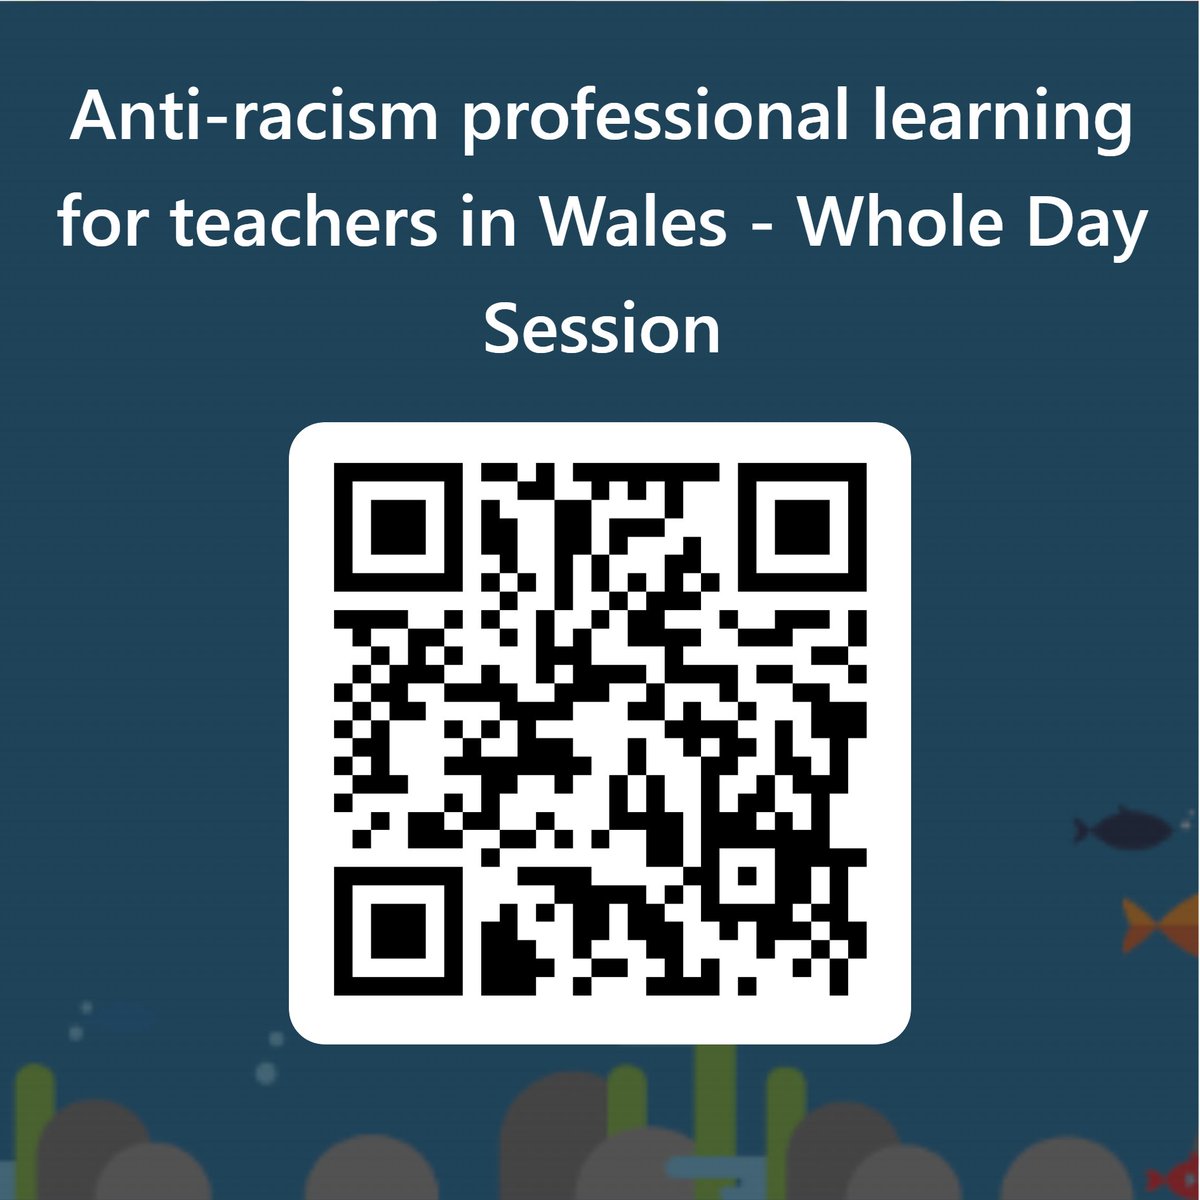 Thanks to our friends @theredcardwales for hosting the Anti-racism professional learning for teachers in Wales - Whole Day Session on the 19th of April! Sign up using the provided information. See you there! 🩵 forms.office.com/e/kvAZ6wJc5X #DARPL @Cardiffmet @WelshGovernment